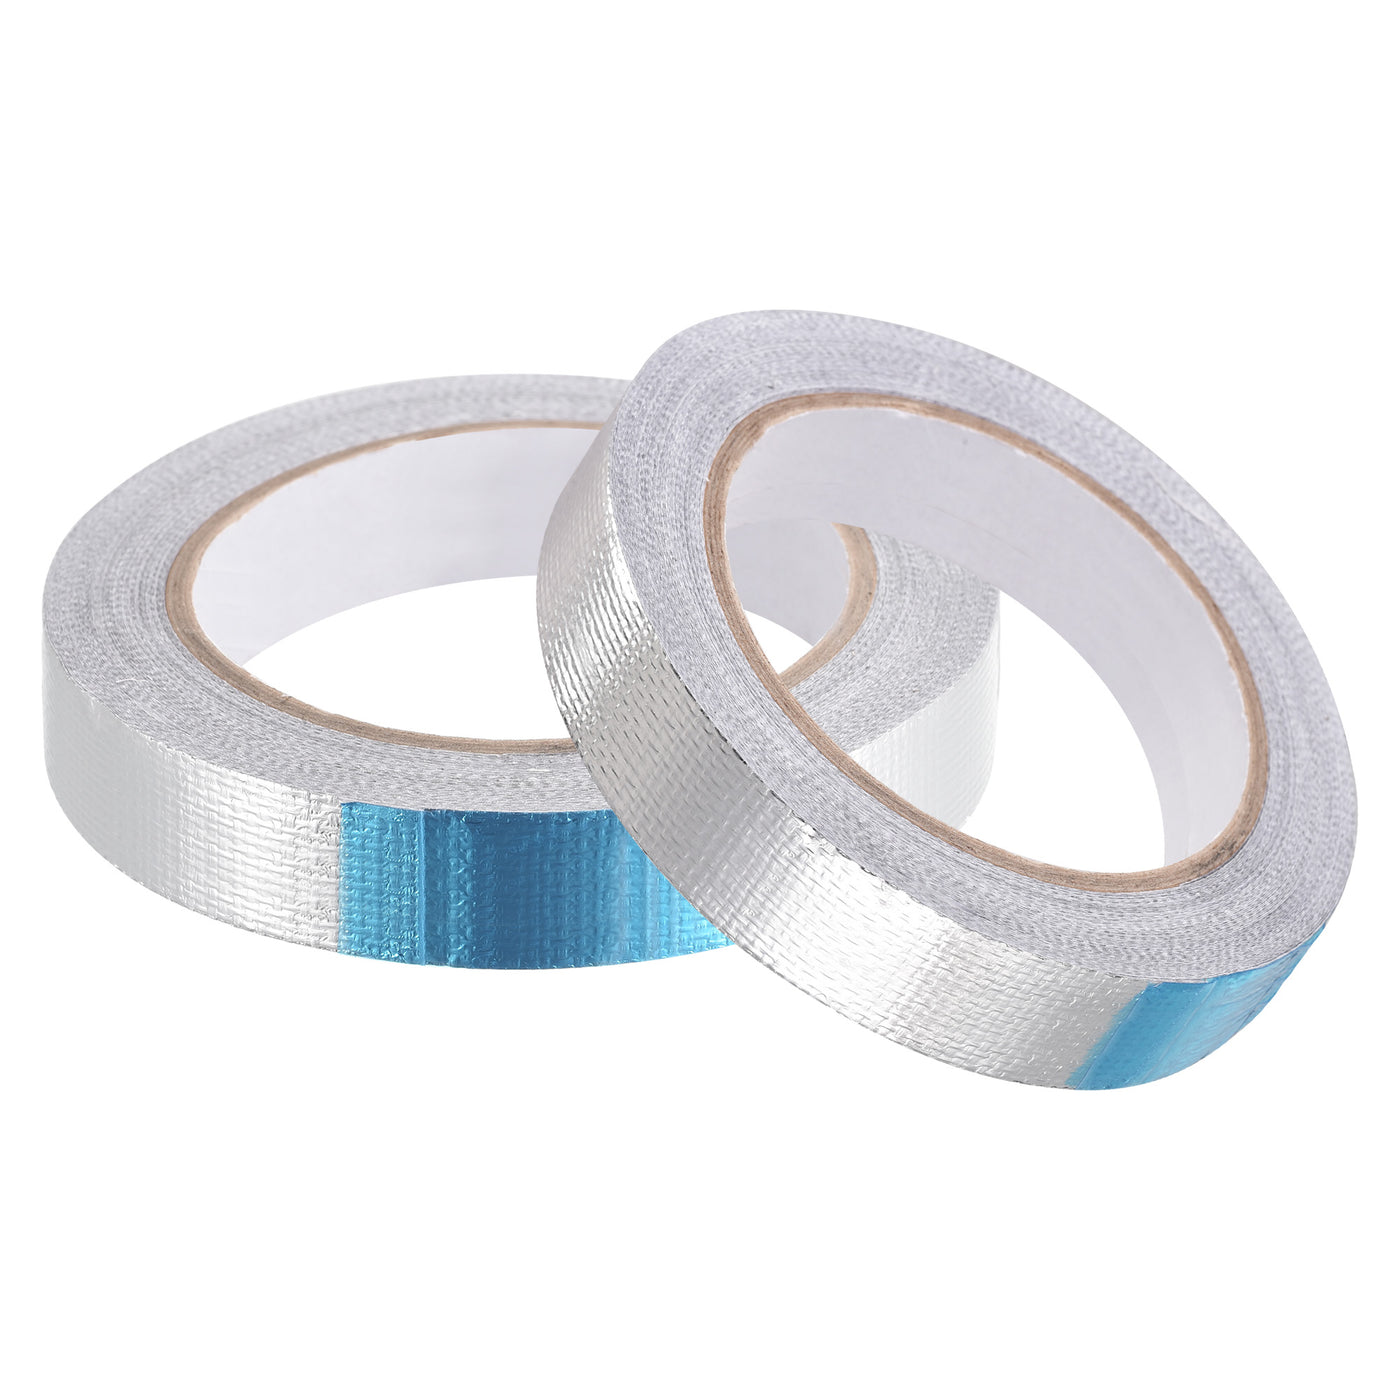 uxcell Uxcell Aluminum Foil Tape High-Temperature Tape for HVAC,Sealing 20mmx20m/65ft 2pcs